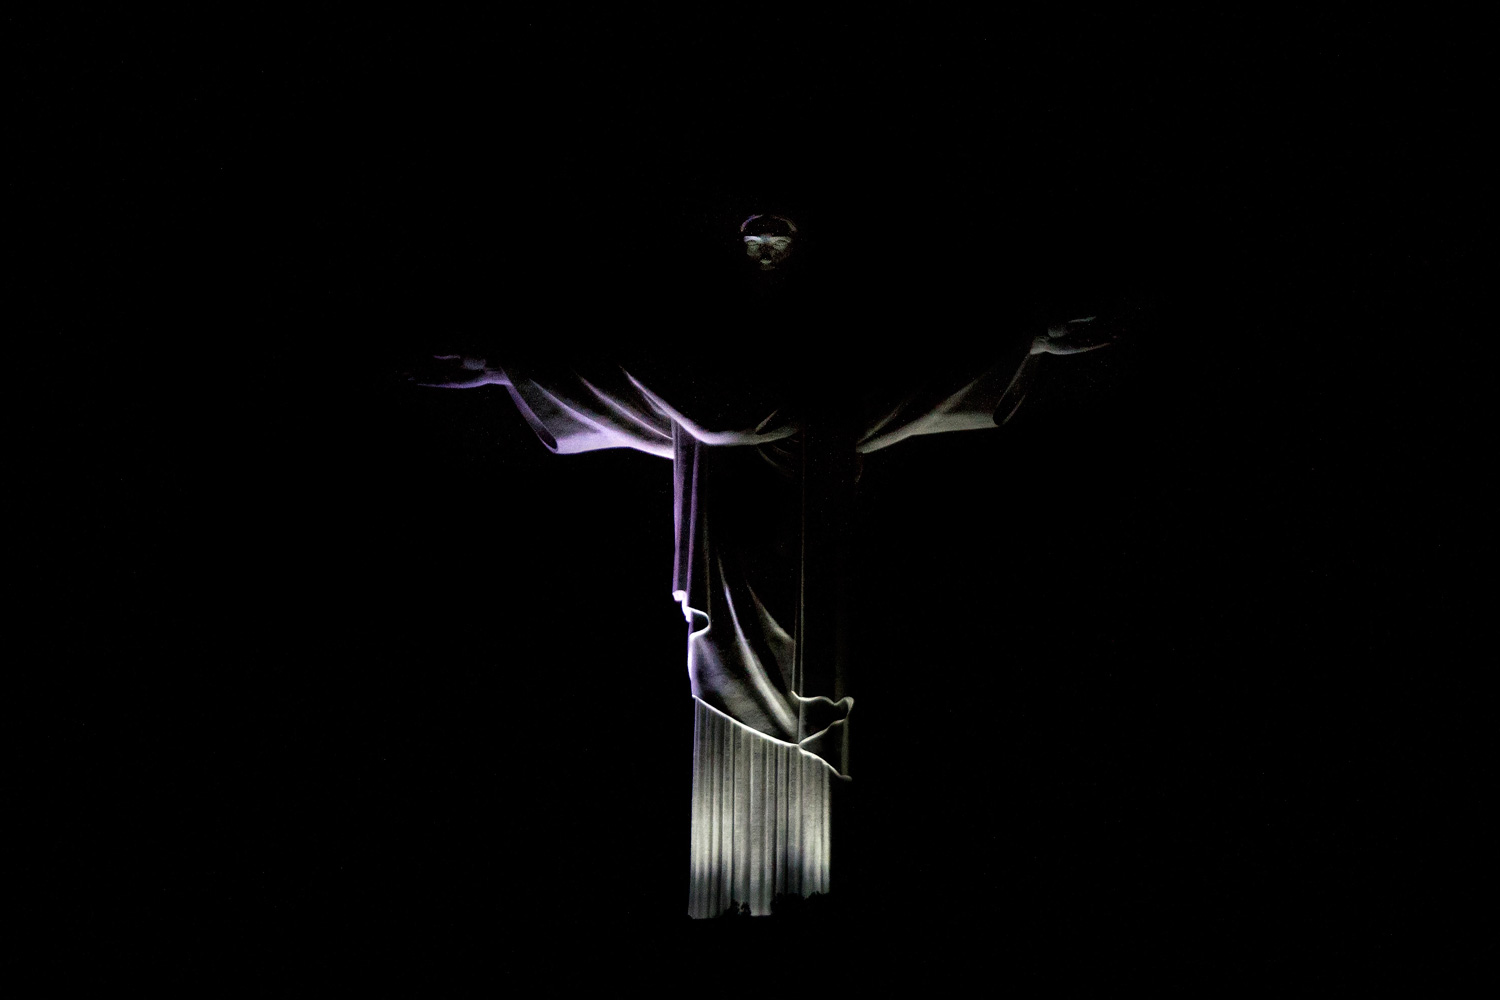 March 31, 2012. The statue of Christ the Redeemer is seen after the lights are switched off for Earth Hour 2012 in Rio de Janeiro.